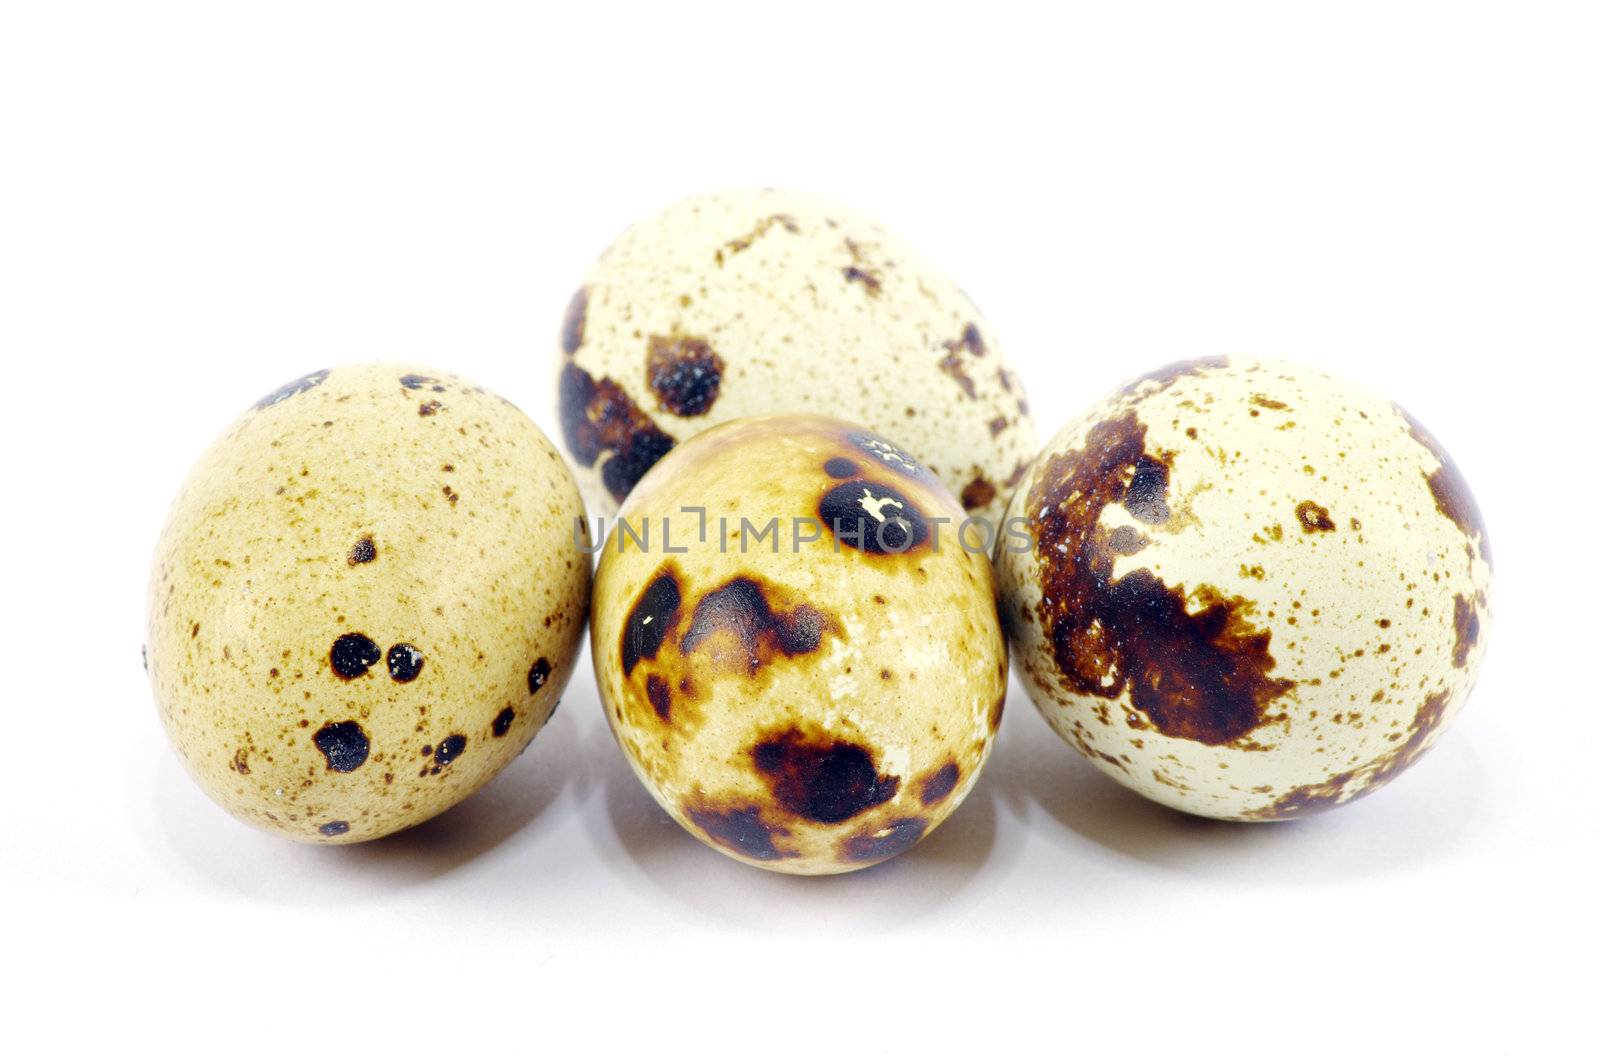 Quail eggs in isolated on white background